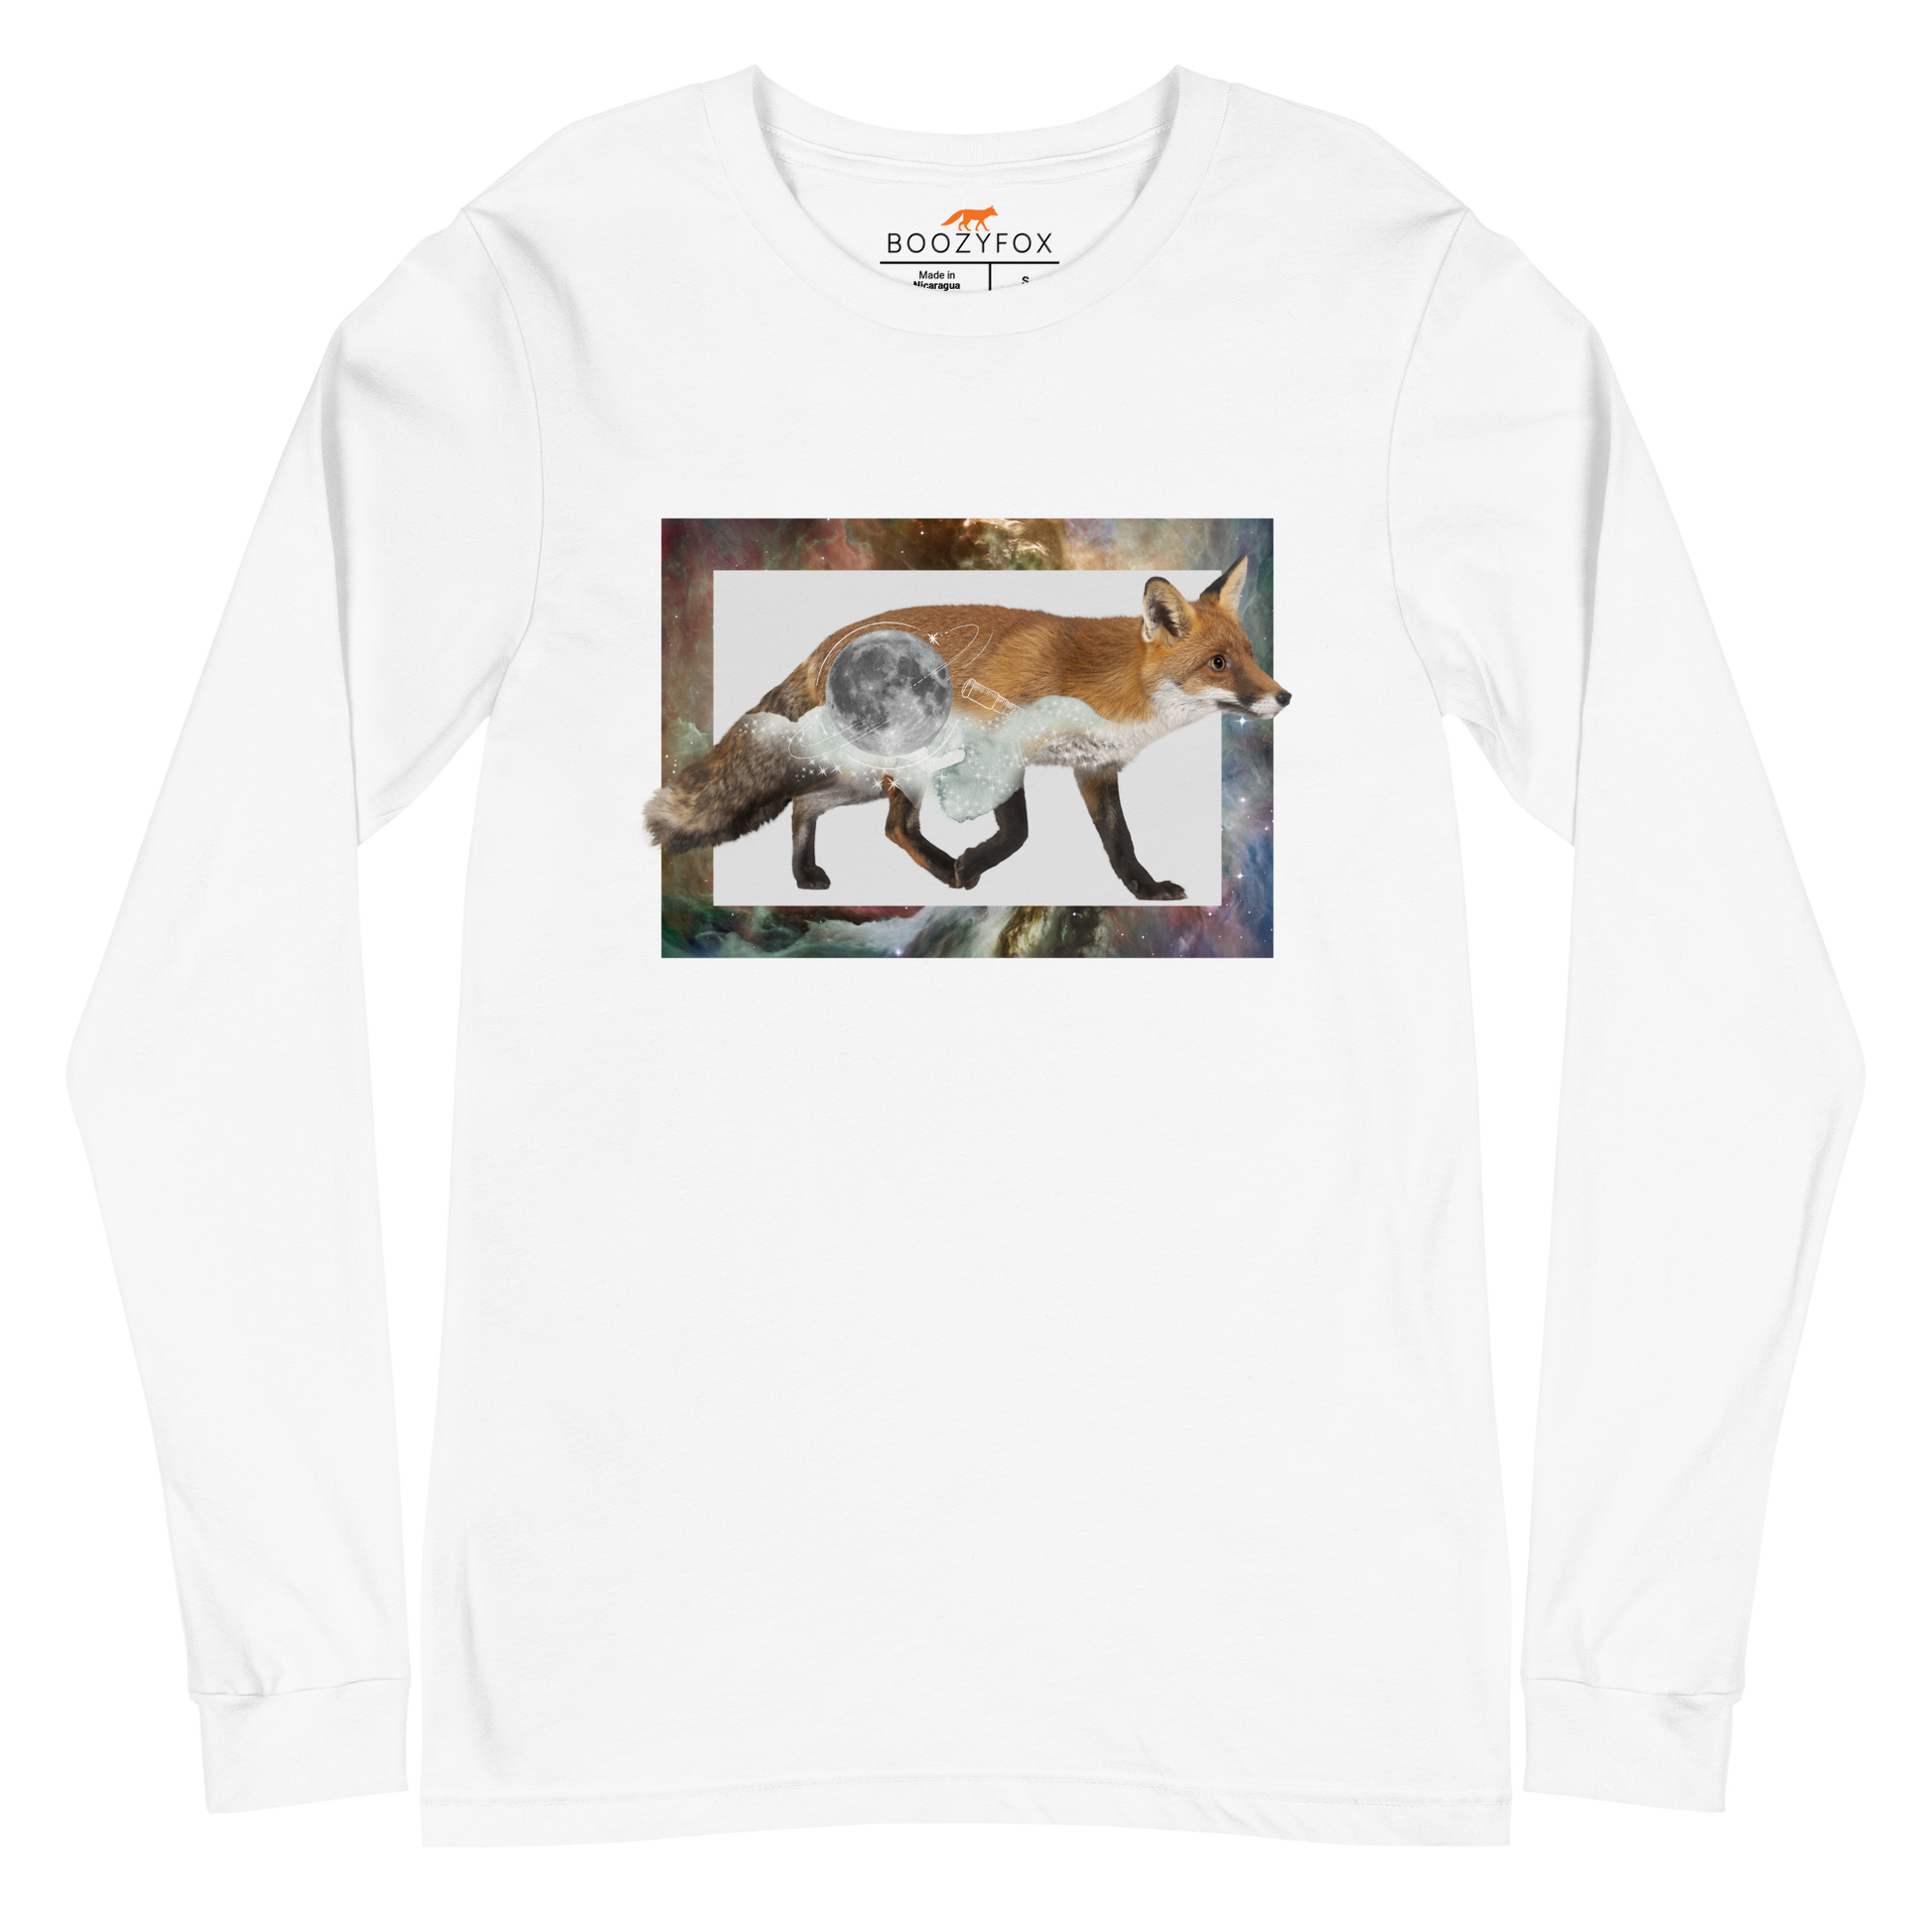 White Fox Long Sleeve Tee featuring a mesmerizing Space Fox graphic on the chest - Cool Fox Long Sleeve Graphic Tees - Boozy Fox